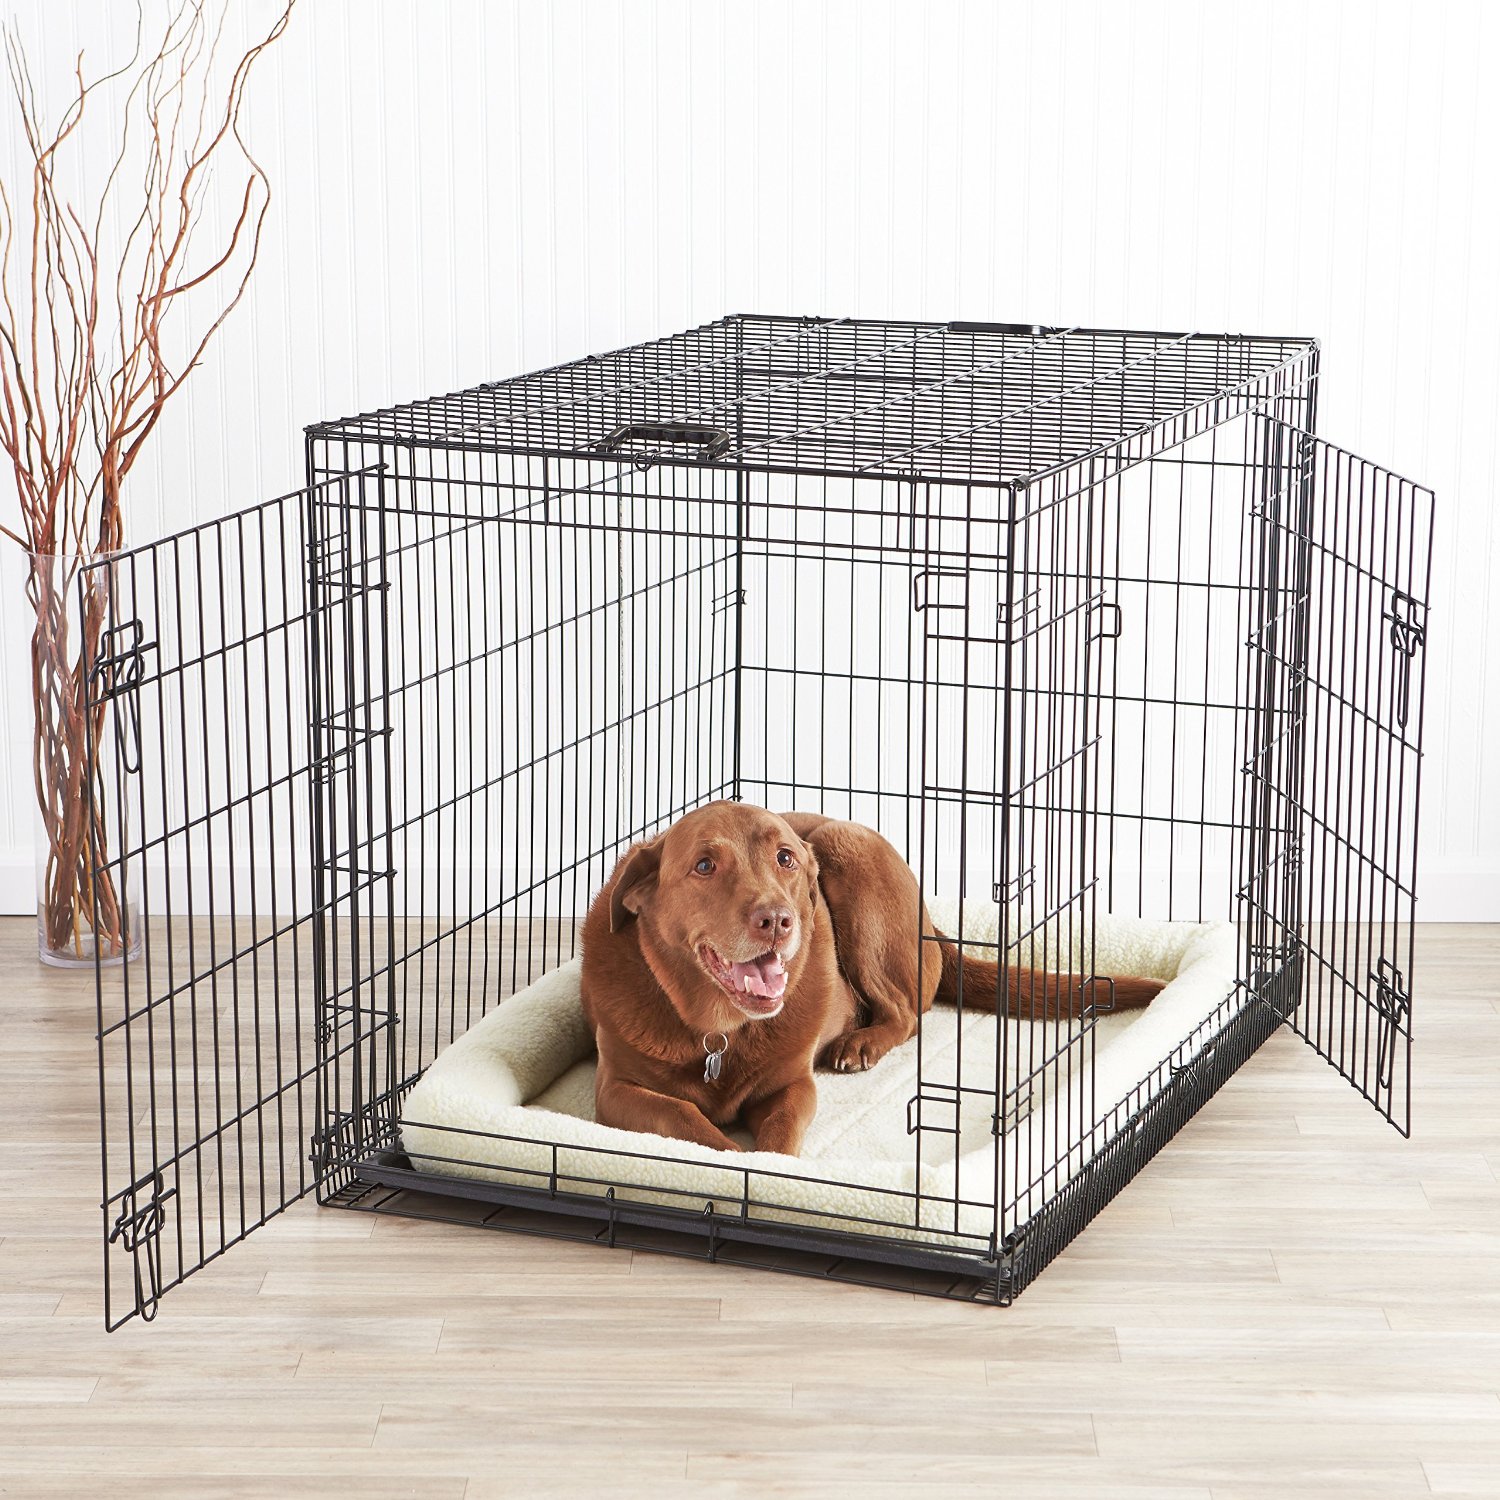 Extra small dog cage